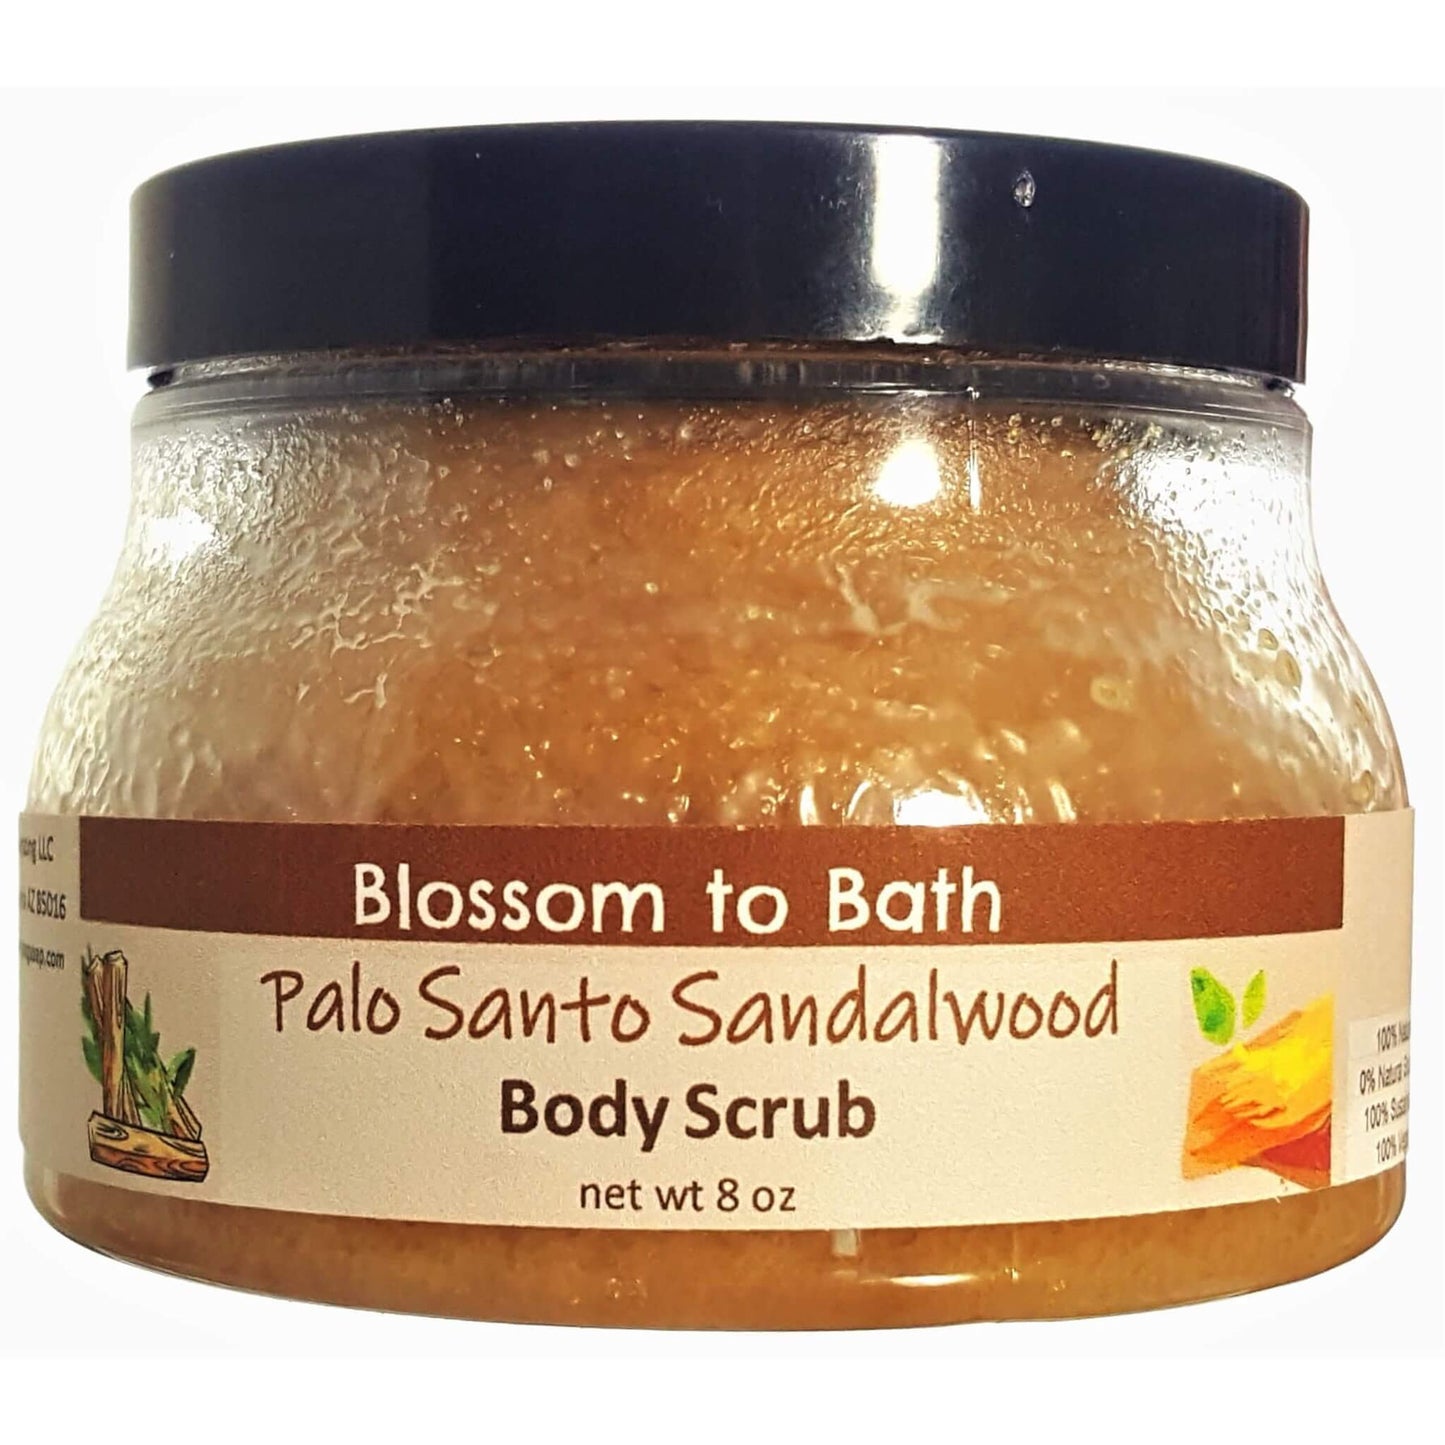 Buy Blossom to Bath Palo Santo Sandalwood Body Scrub from Flowersong Soap Studio.  Large crystal turbinado sugar plus  rich oils conveniently exfoliate and moisturize in one step  A journey into the sacred, the exotic tones of this special blend resonate with warm woodiness that adds an uplifting vibration.